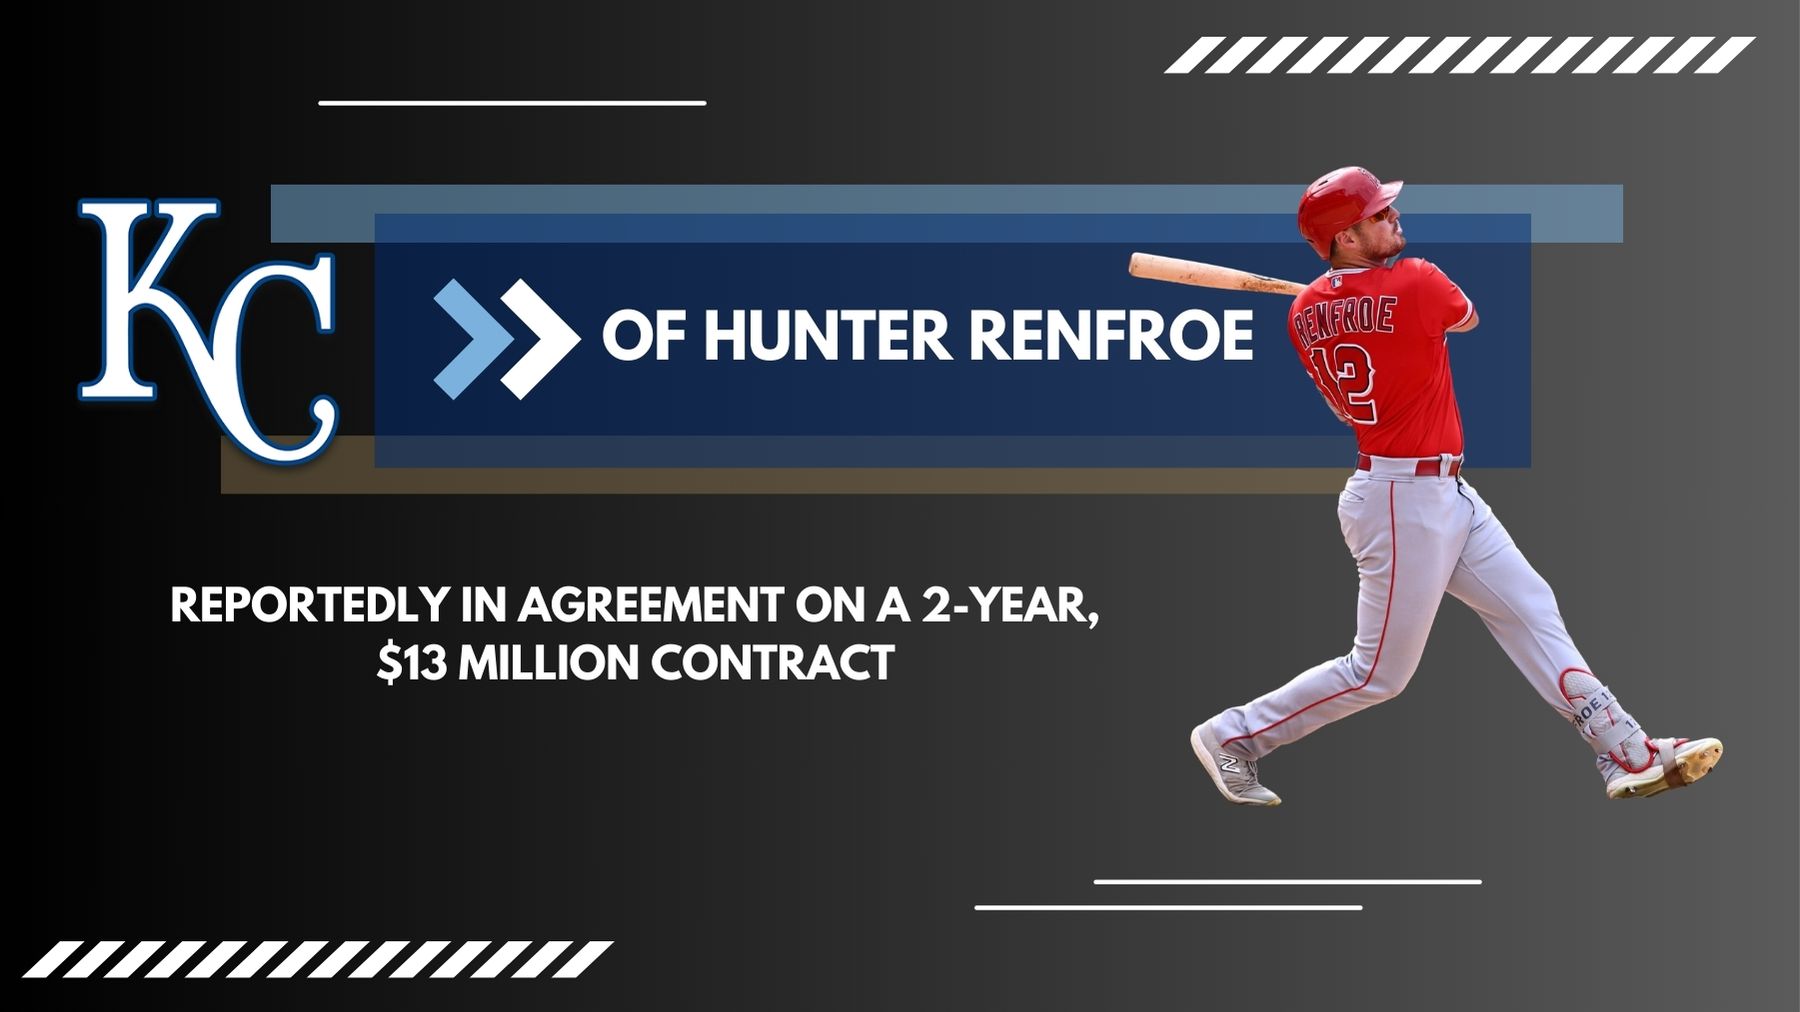 Royals agree to terms with Hunter Renfroe